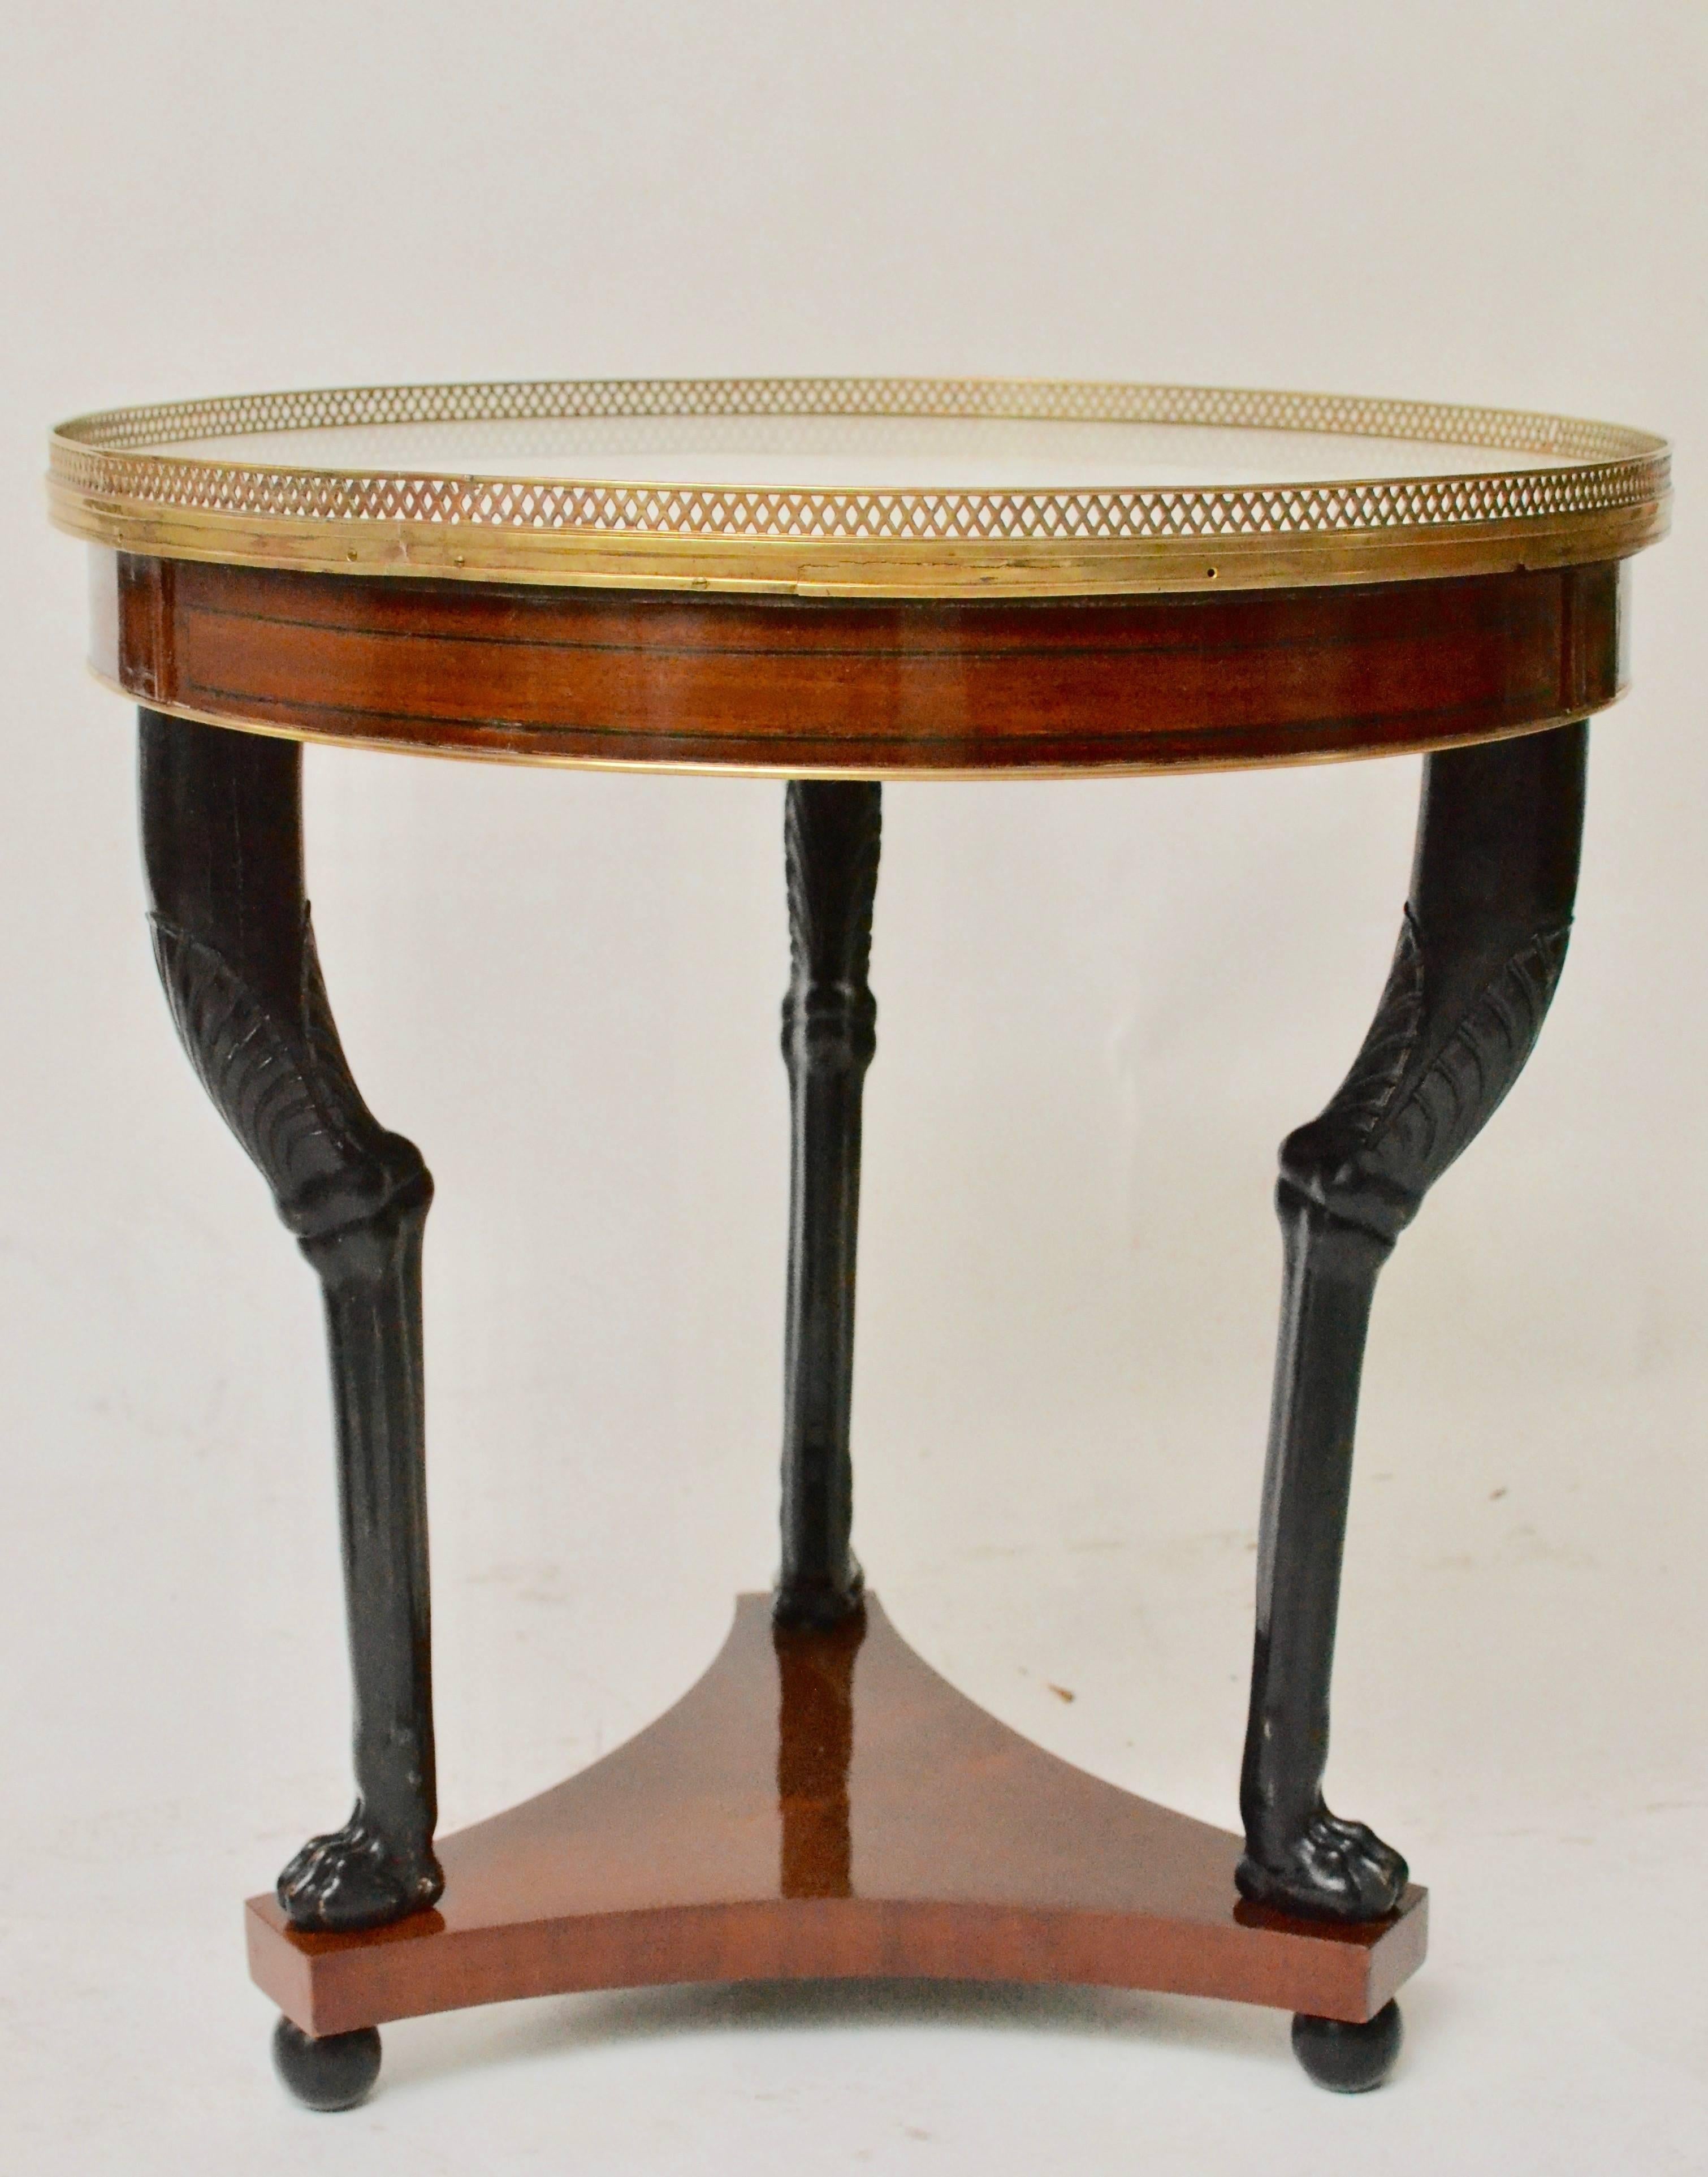 A French Directoire mahogany guéridon table with a white marble top and gilt bronze mounts, late 18th century.